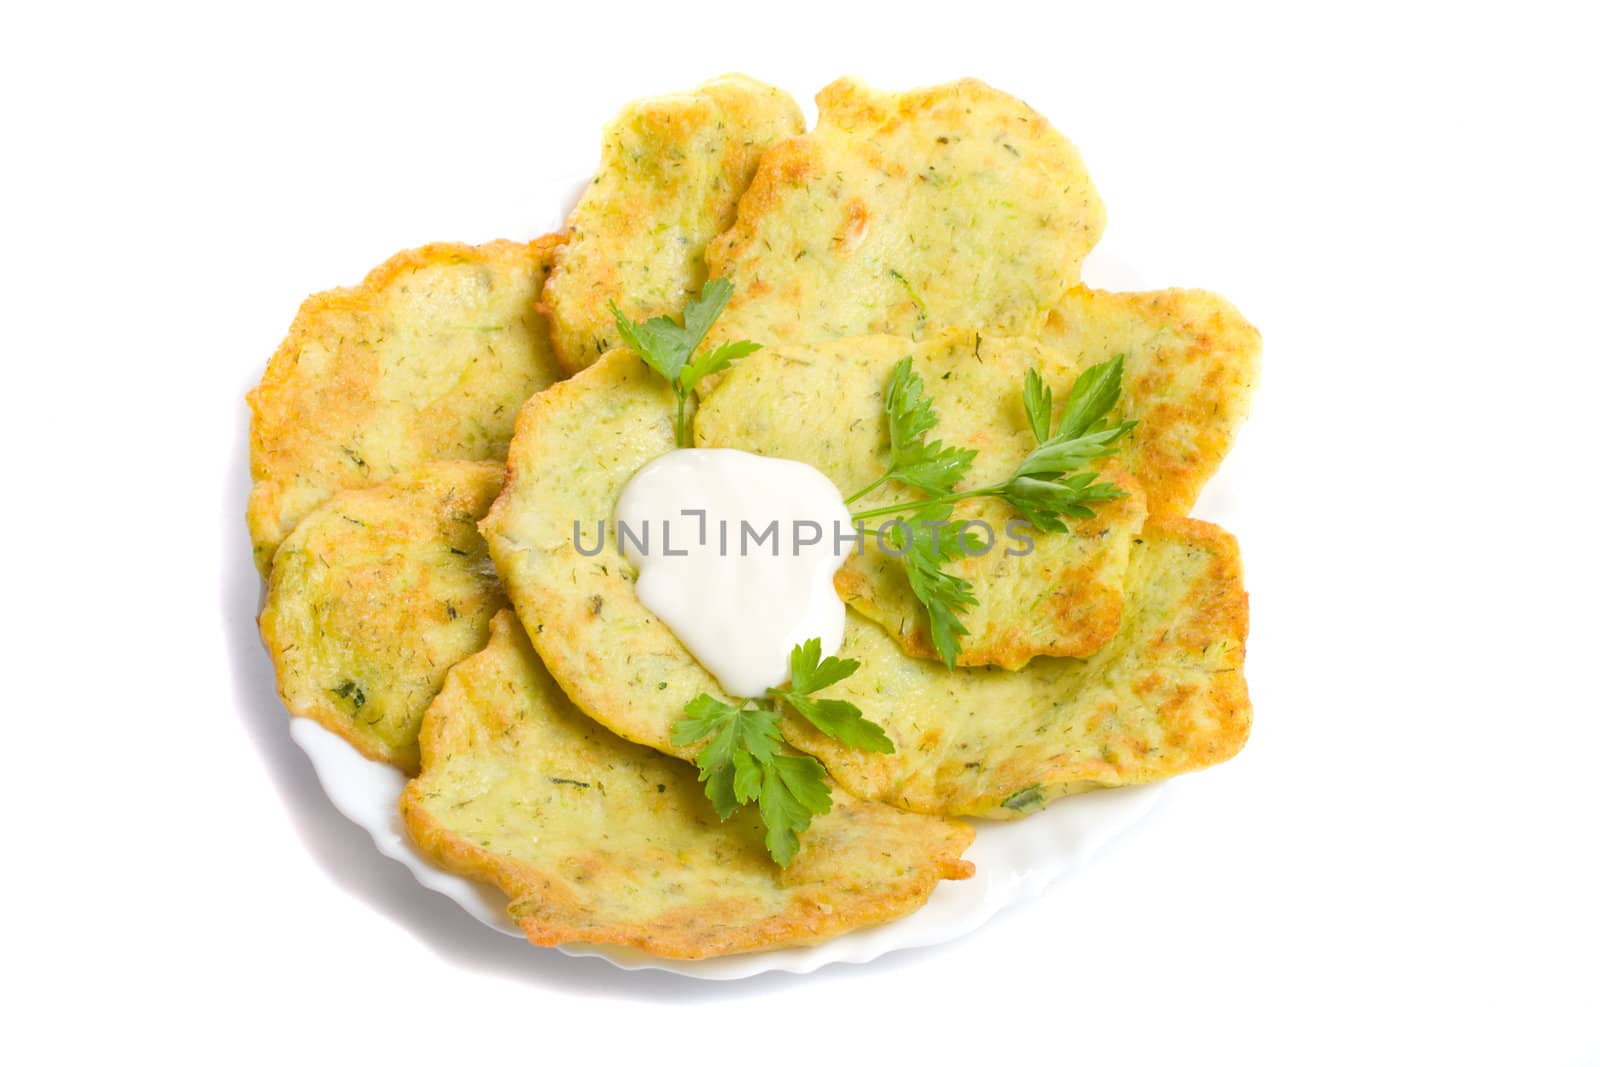 close-up pancake from marrow with parsley on plate, isolated over white background